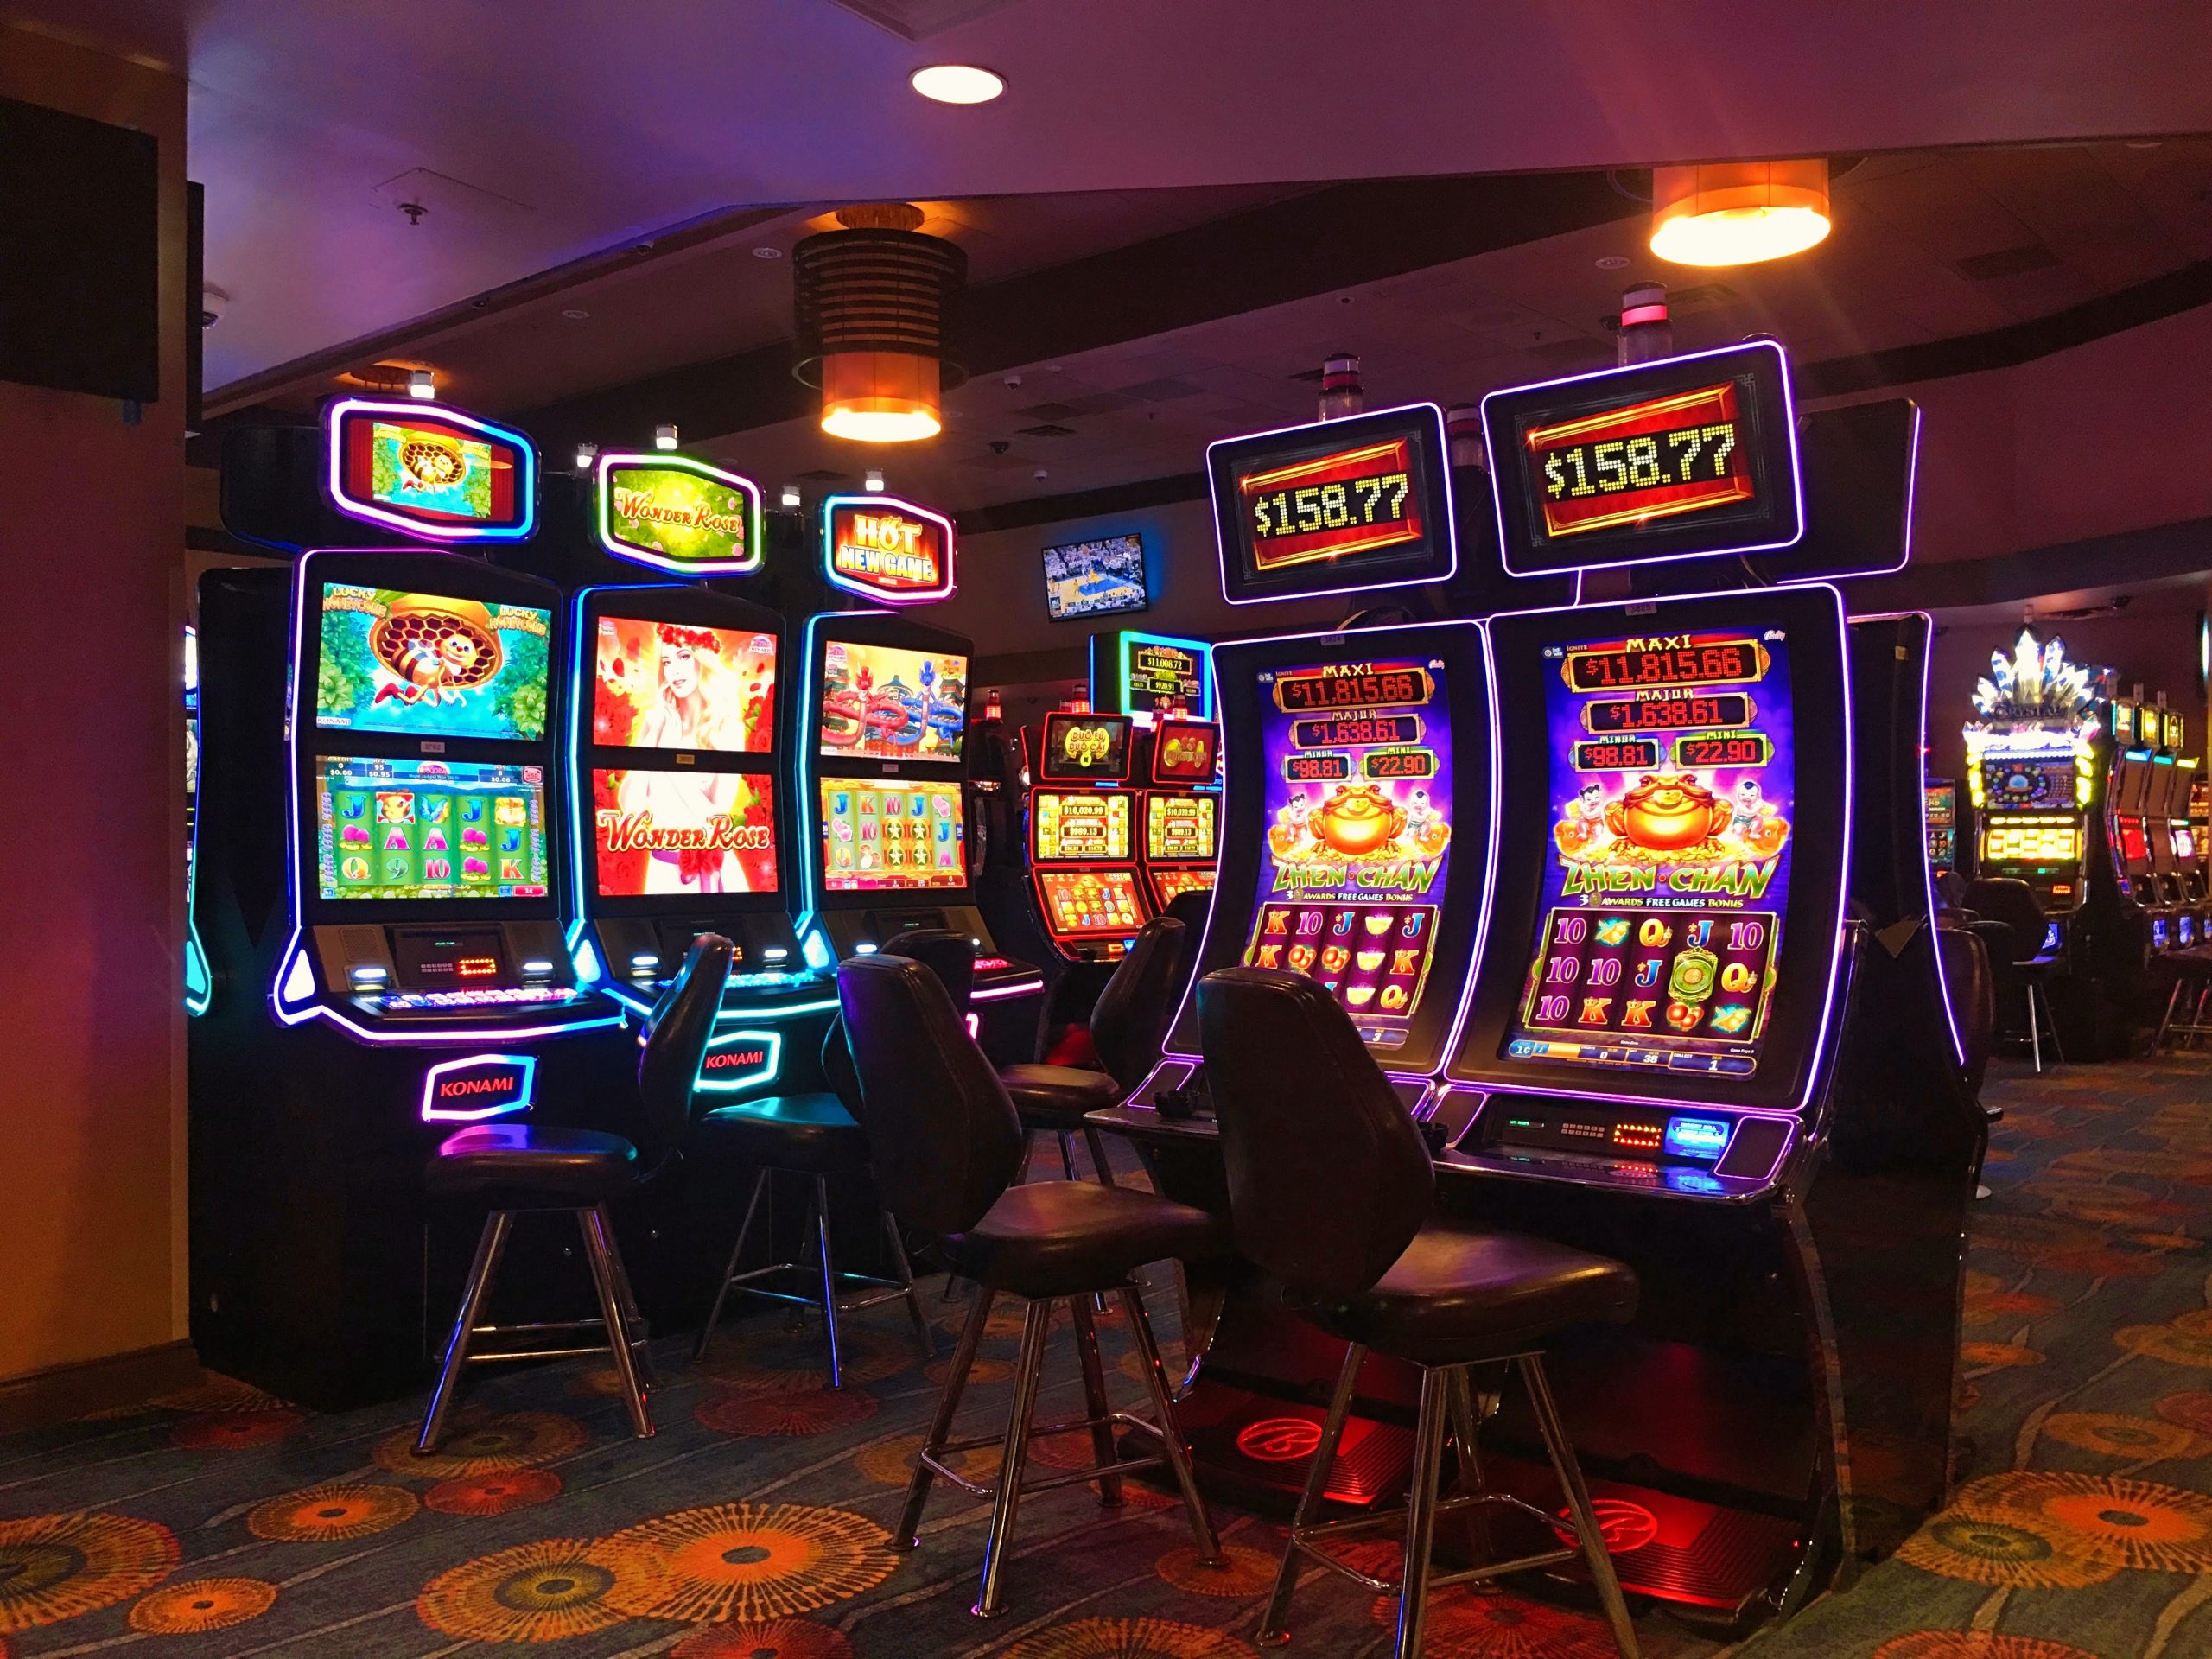 The Anthony Robins Guide To slot machine casino online